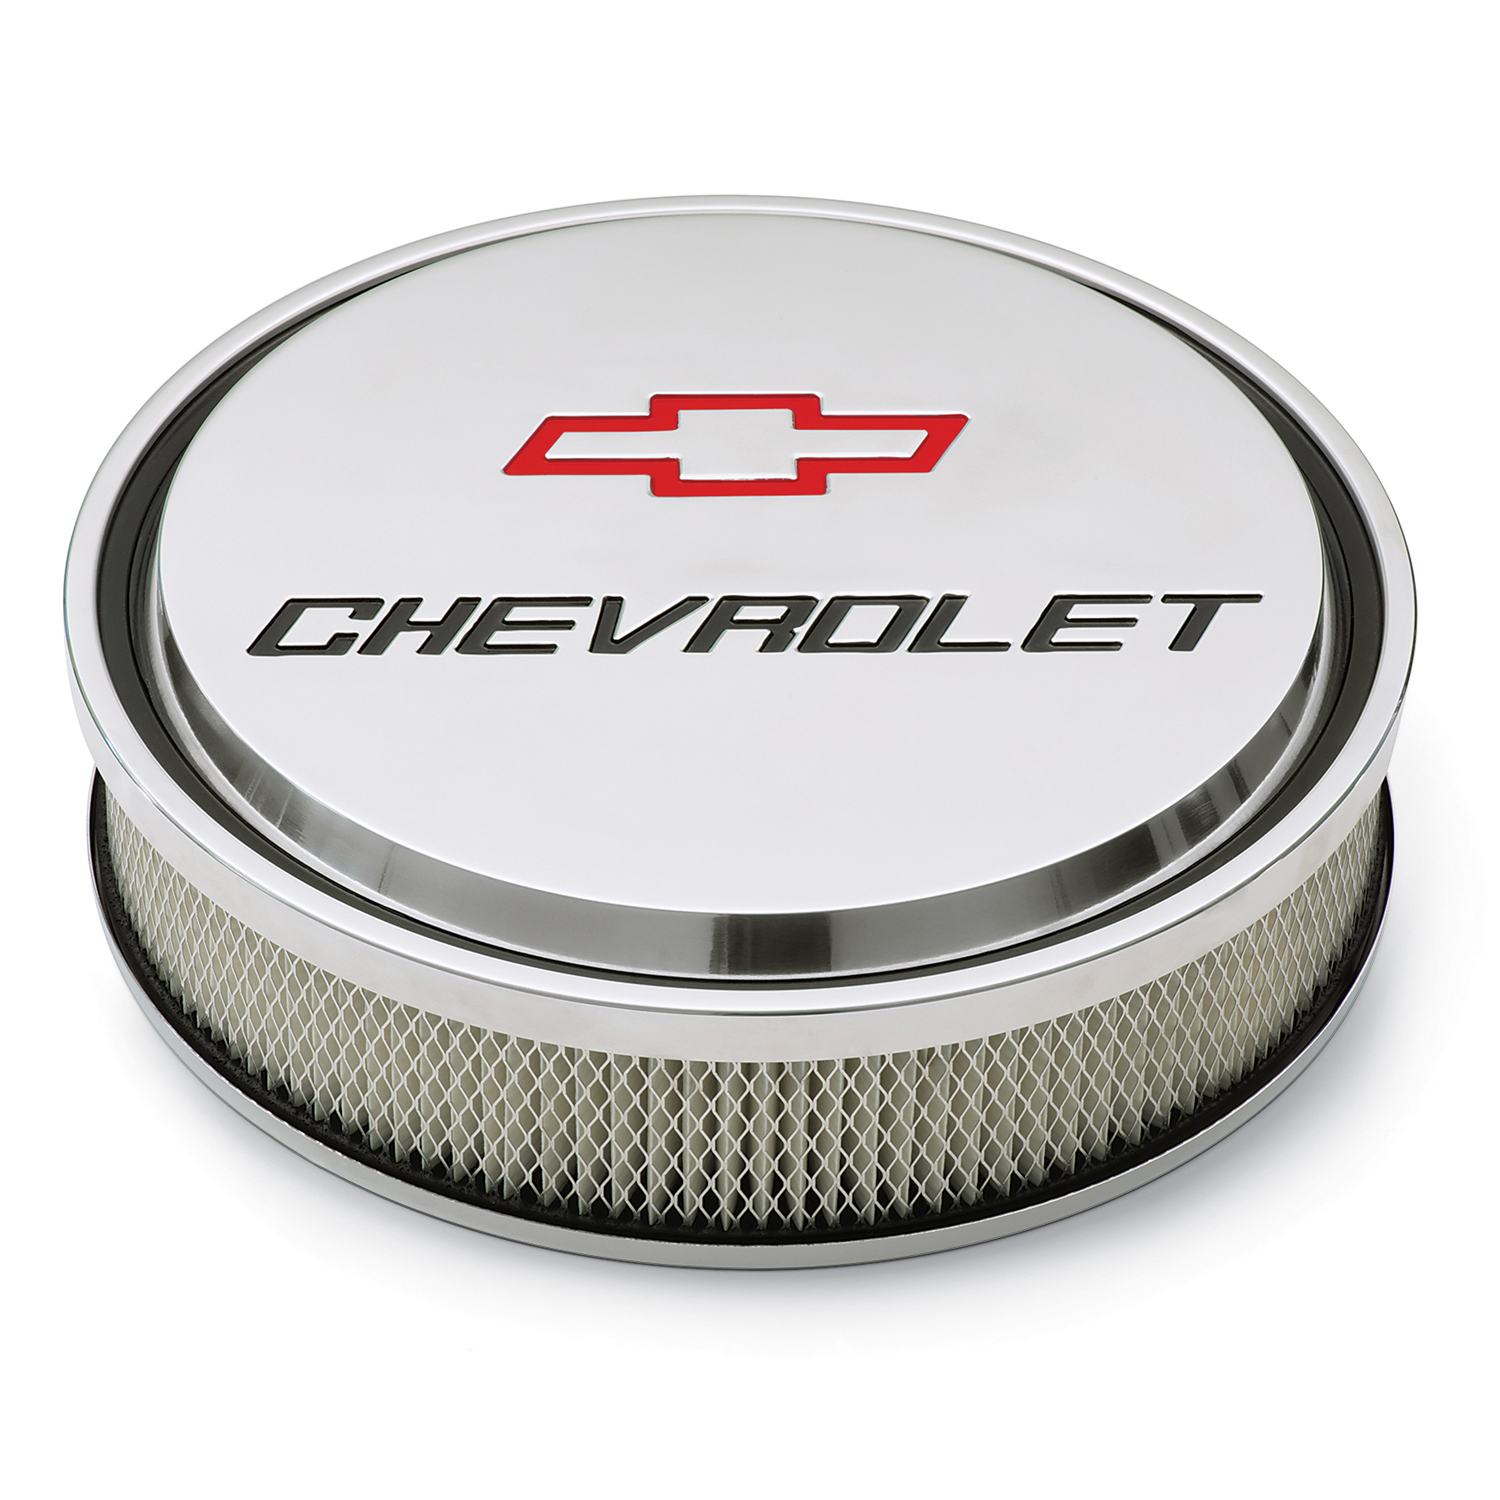 Recessed Chevy and Bowtie Emblems - 141-833